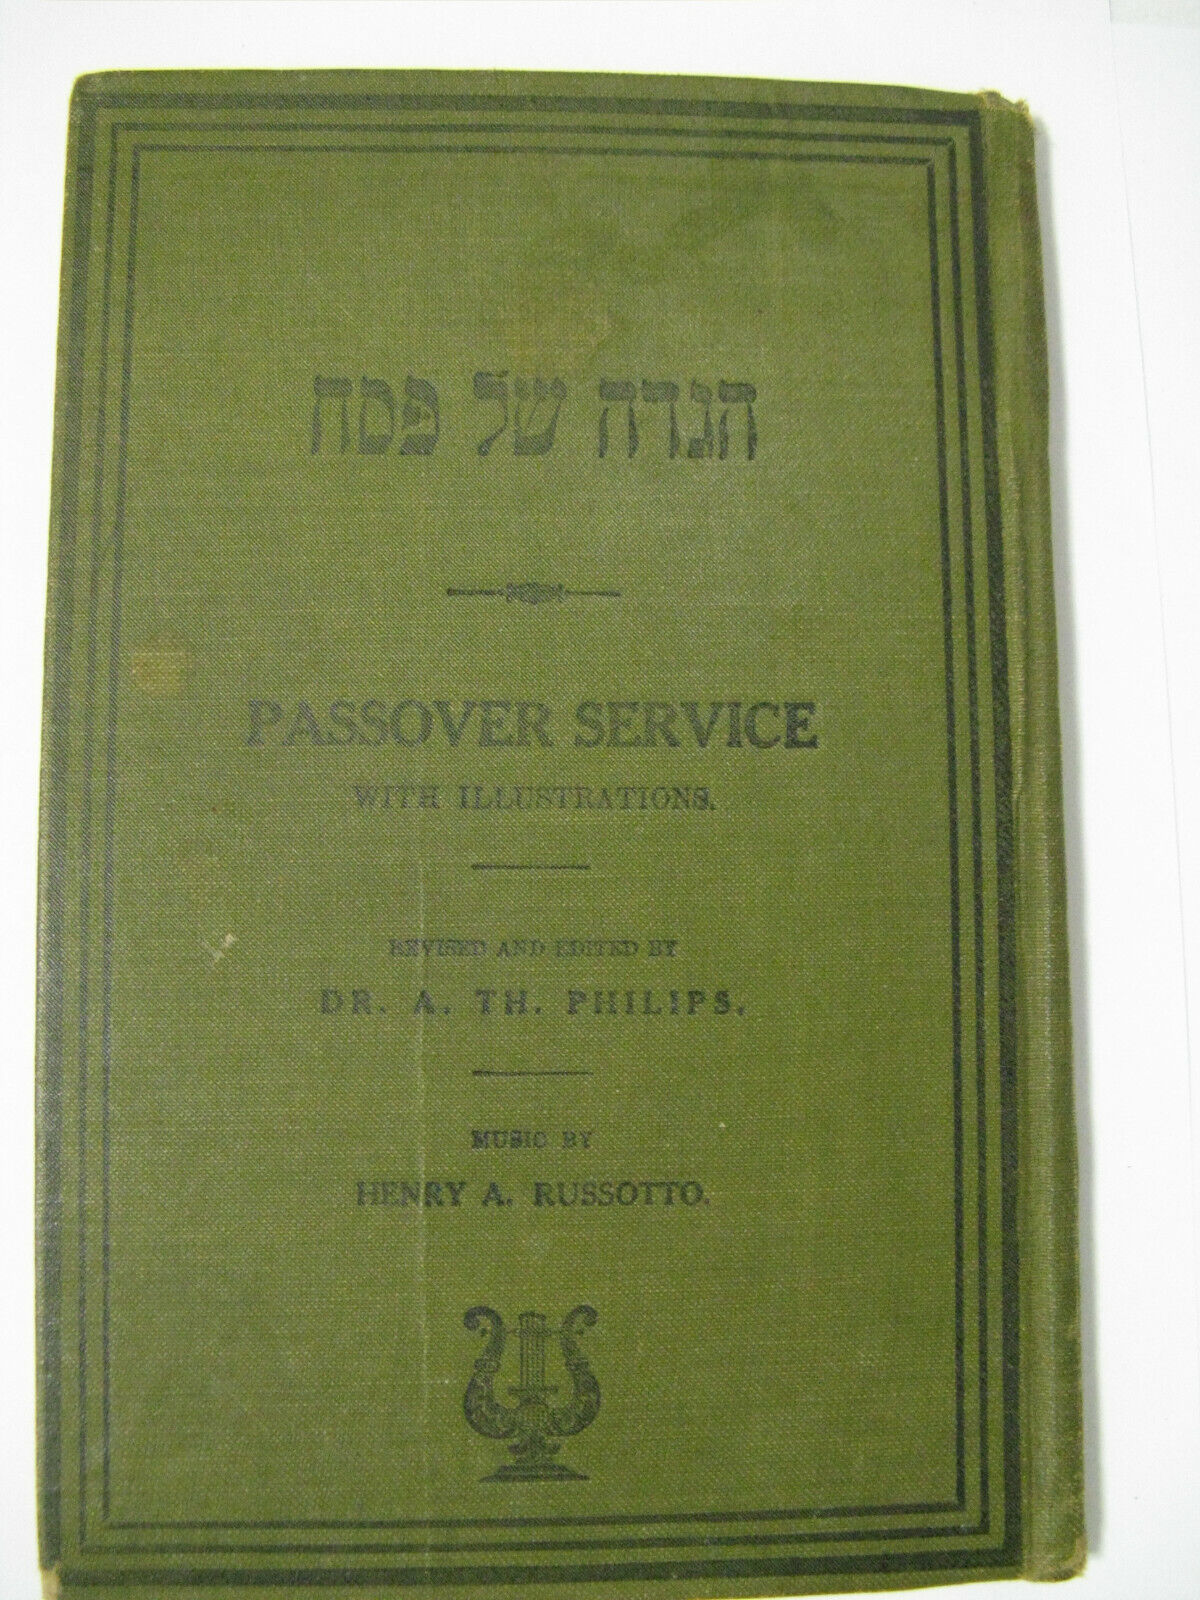 Haggadah New York 1912 Passover Service w/ Illustrations Philips Henry Russotto